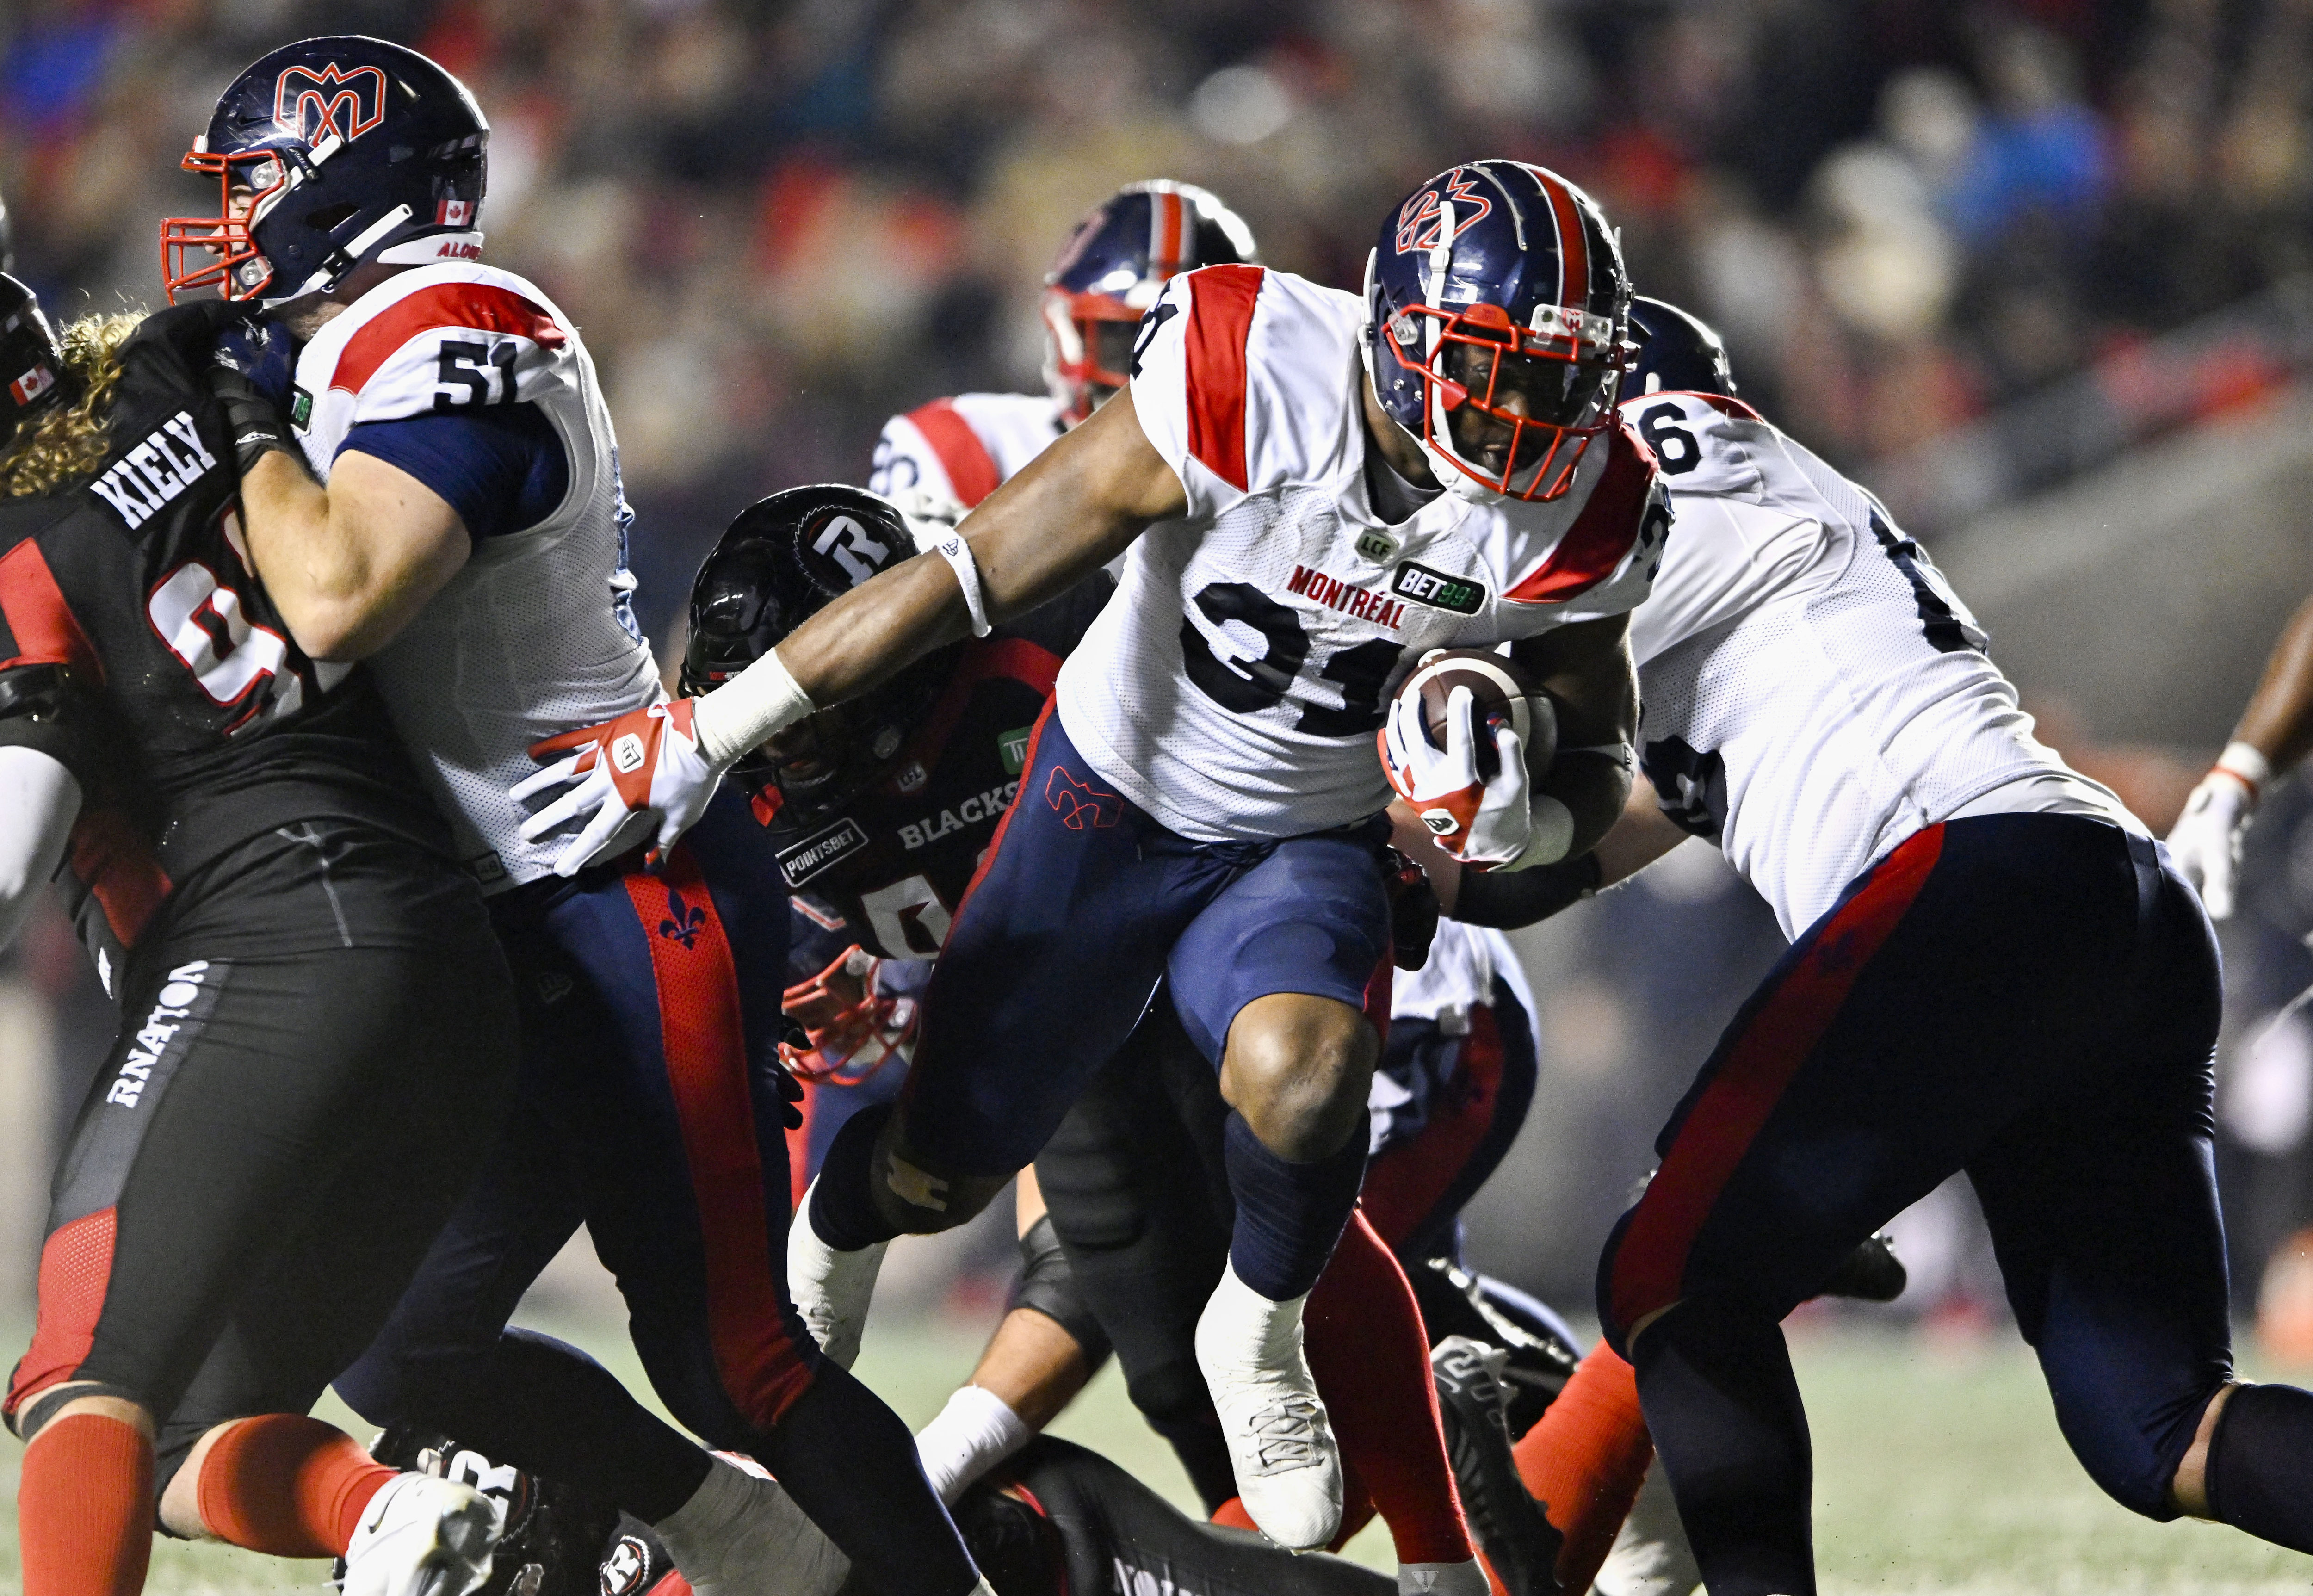 Alouettes clinch playoff berth with 34-30 victory over Redblacks